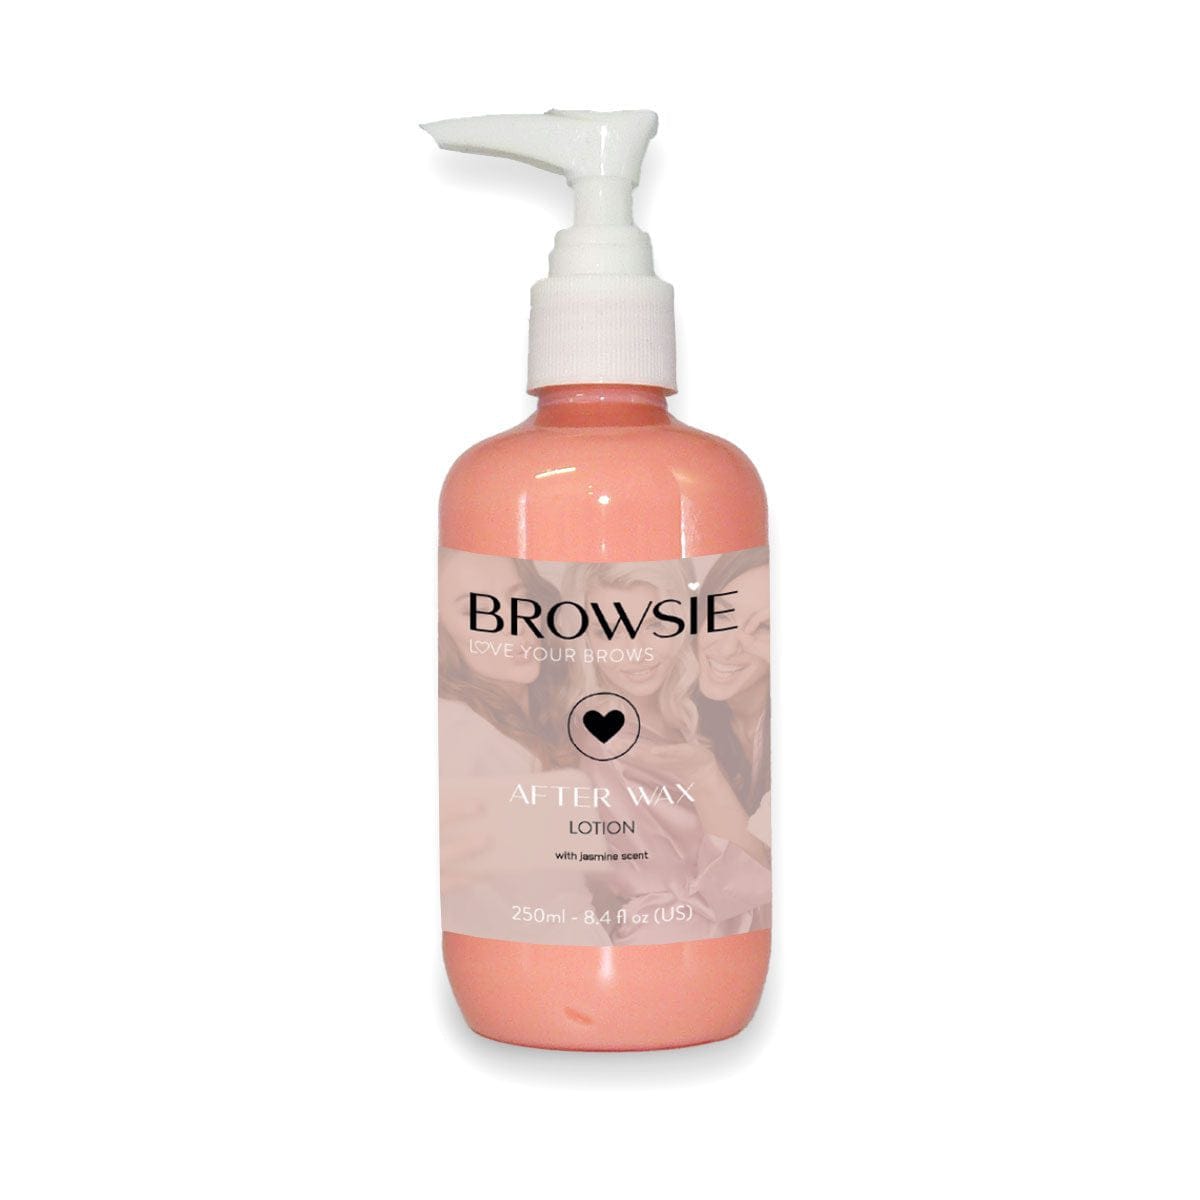 Browsie After Wax Lotion 250ml Lashes &amp; Brows - Jax Wax - Luxe Pacifique